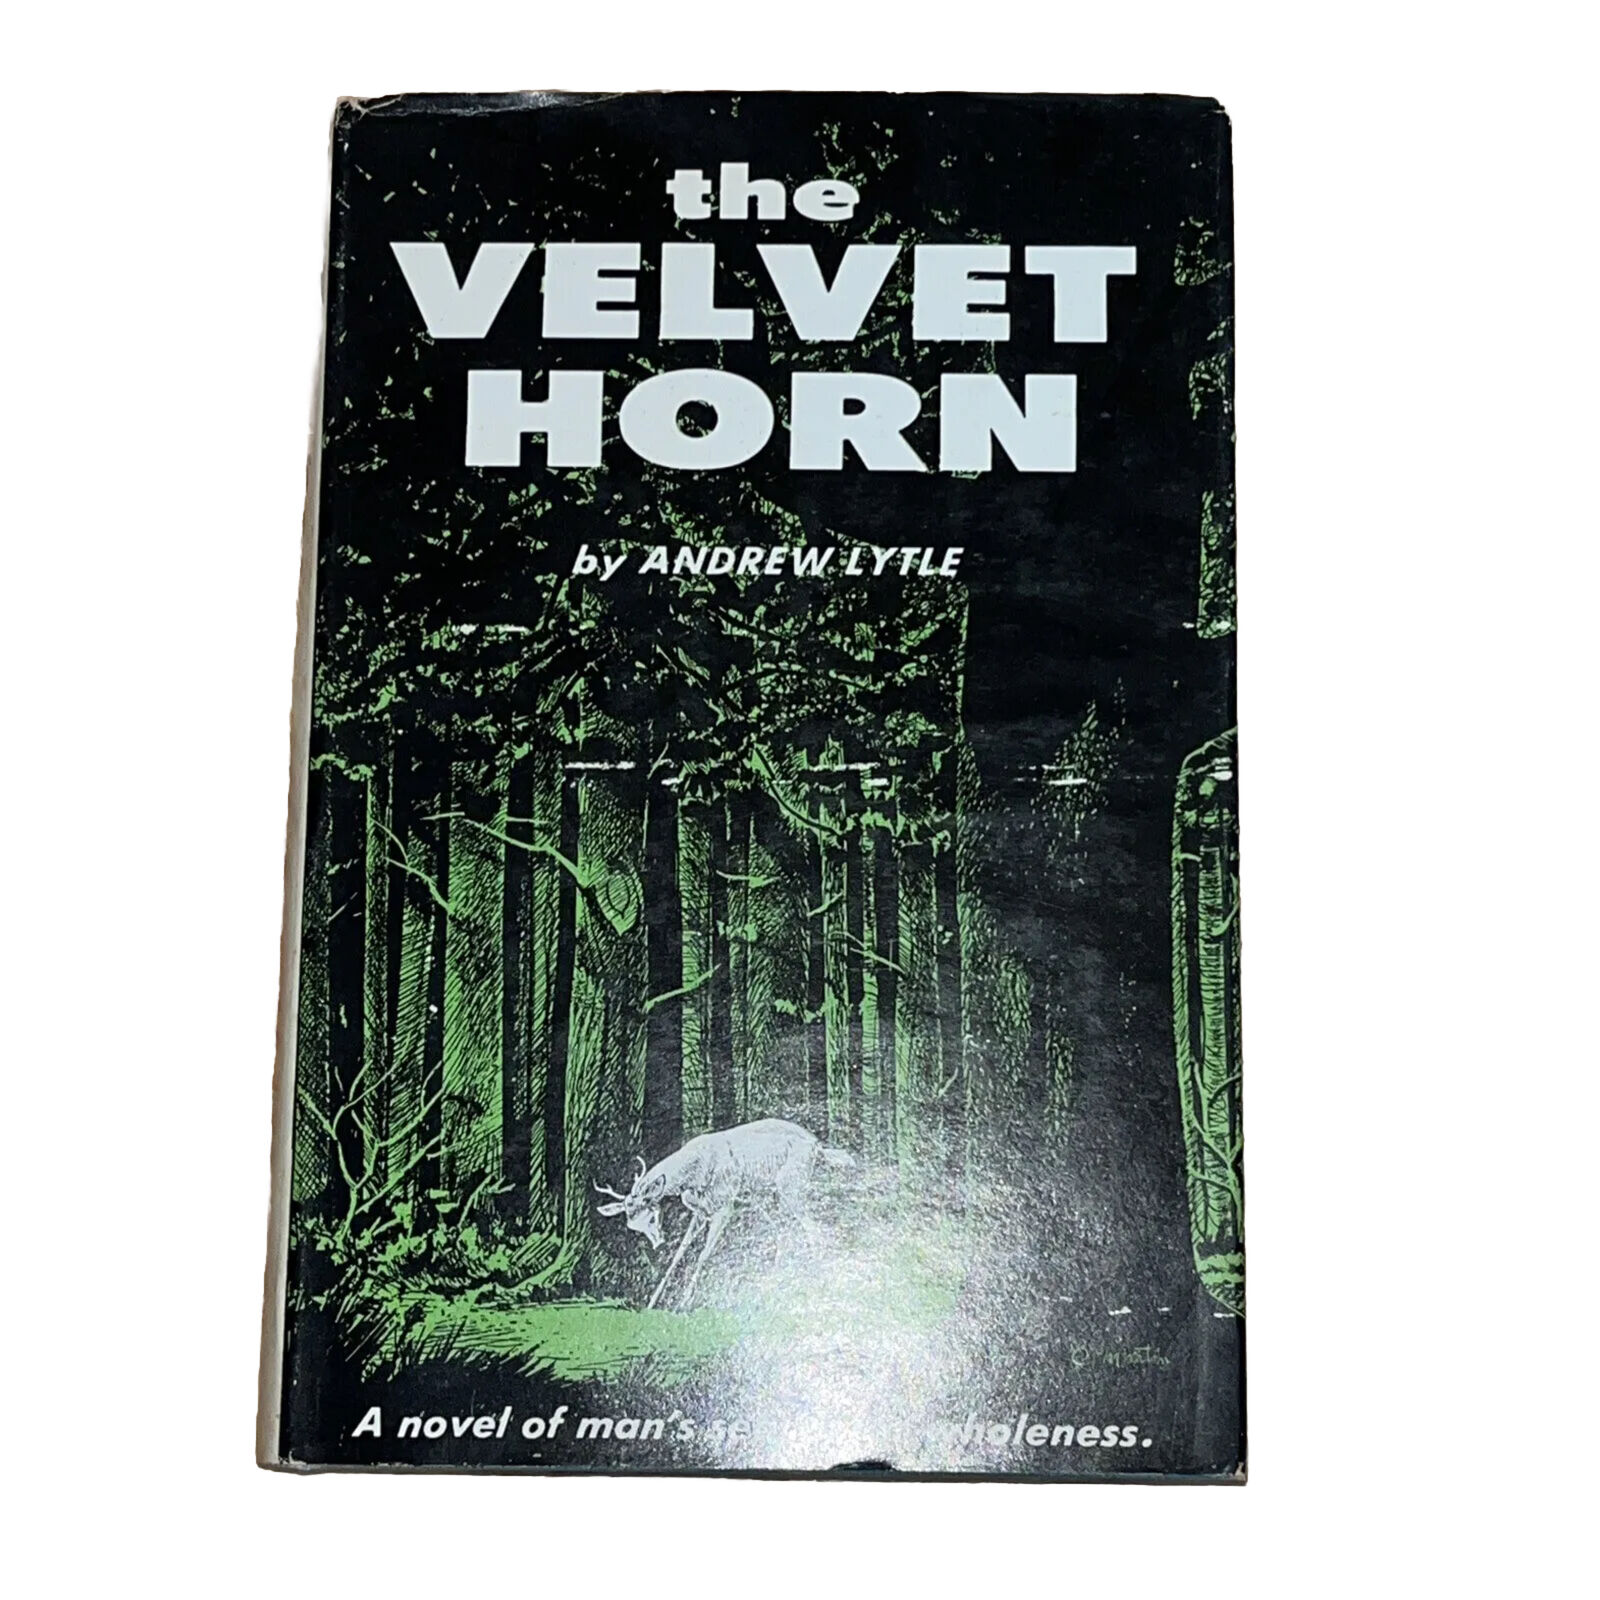 The Velvet Horn by Andrew Lytle 1st Ed 2nd Printing 1957 Signed By Author .